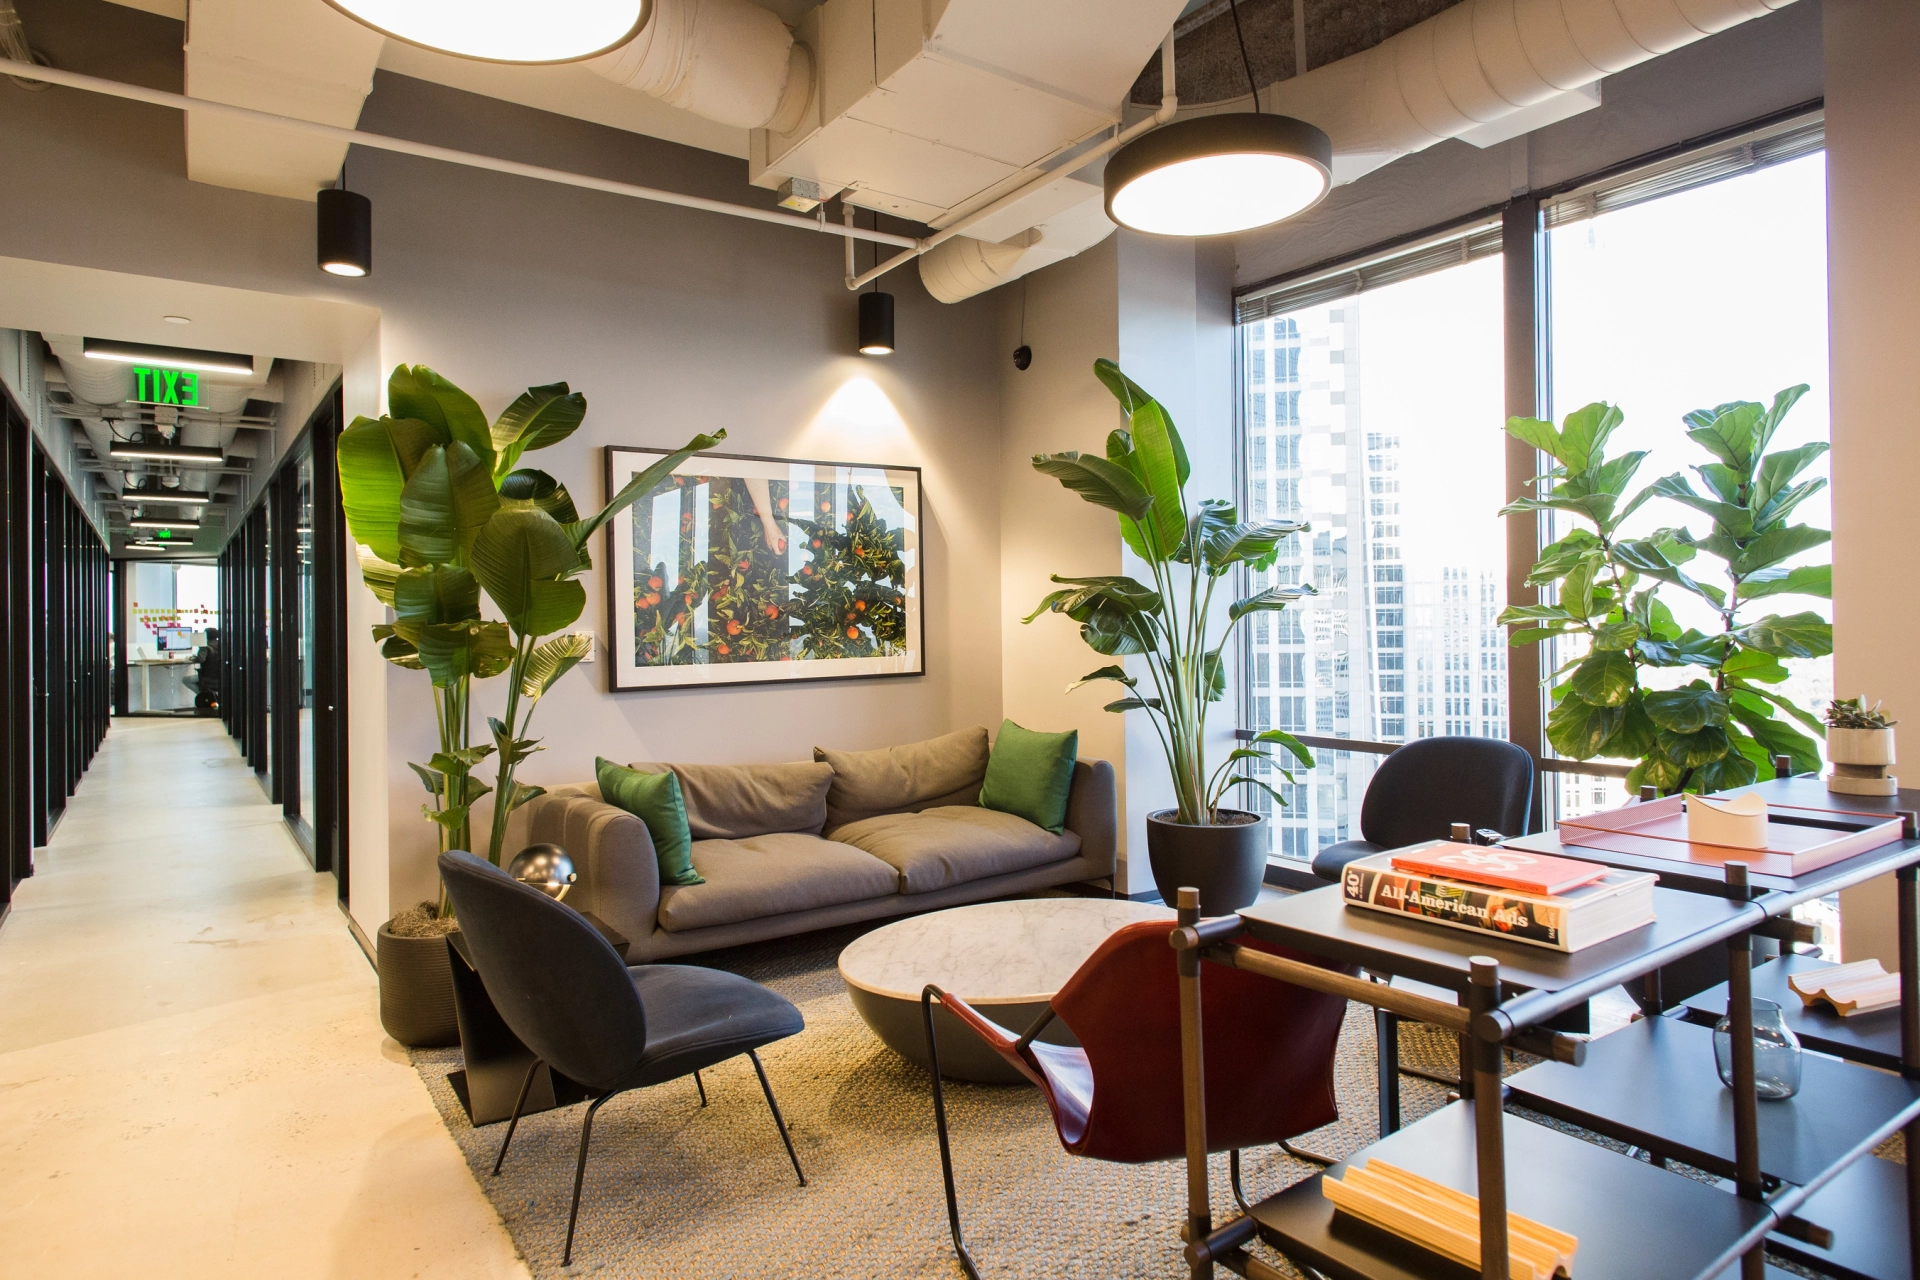 A coworking space with a table and plants.